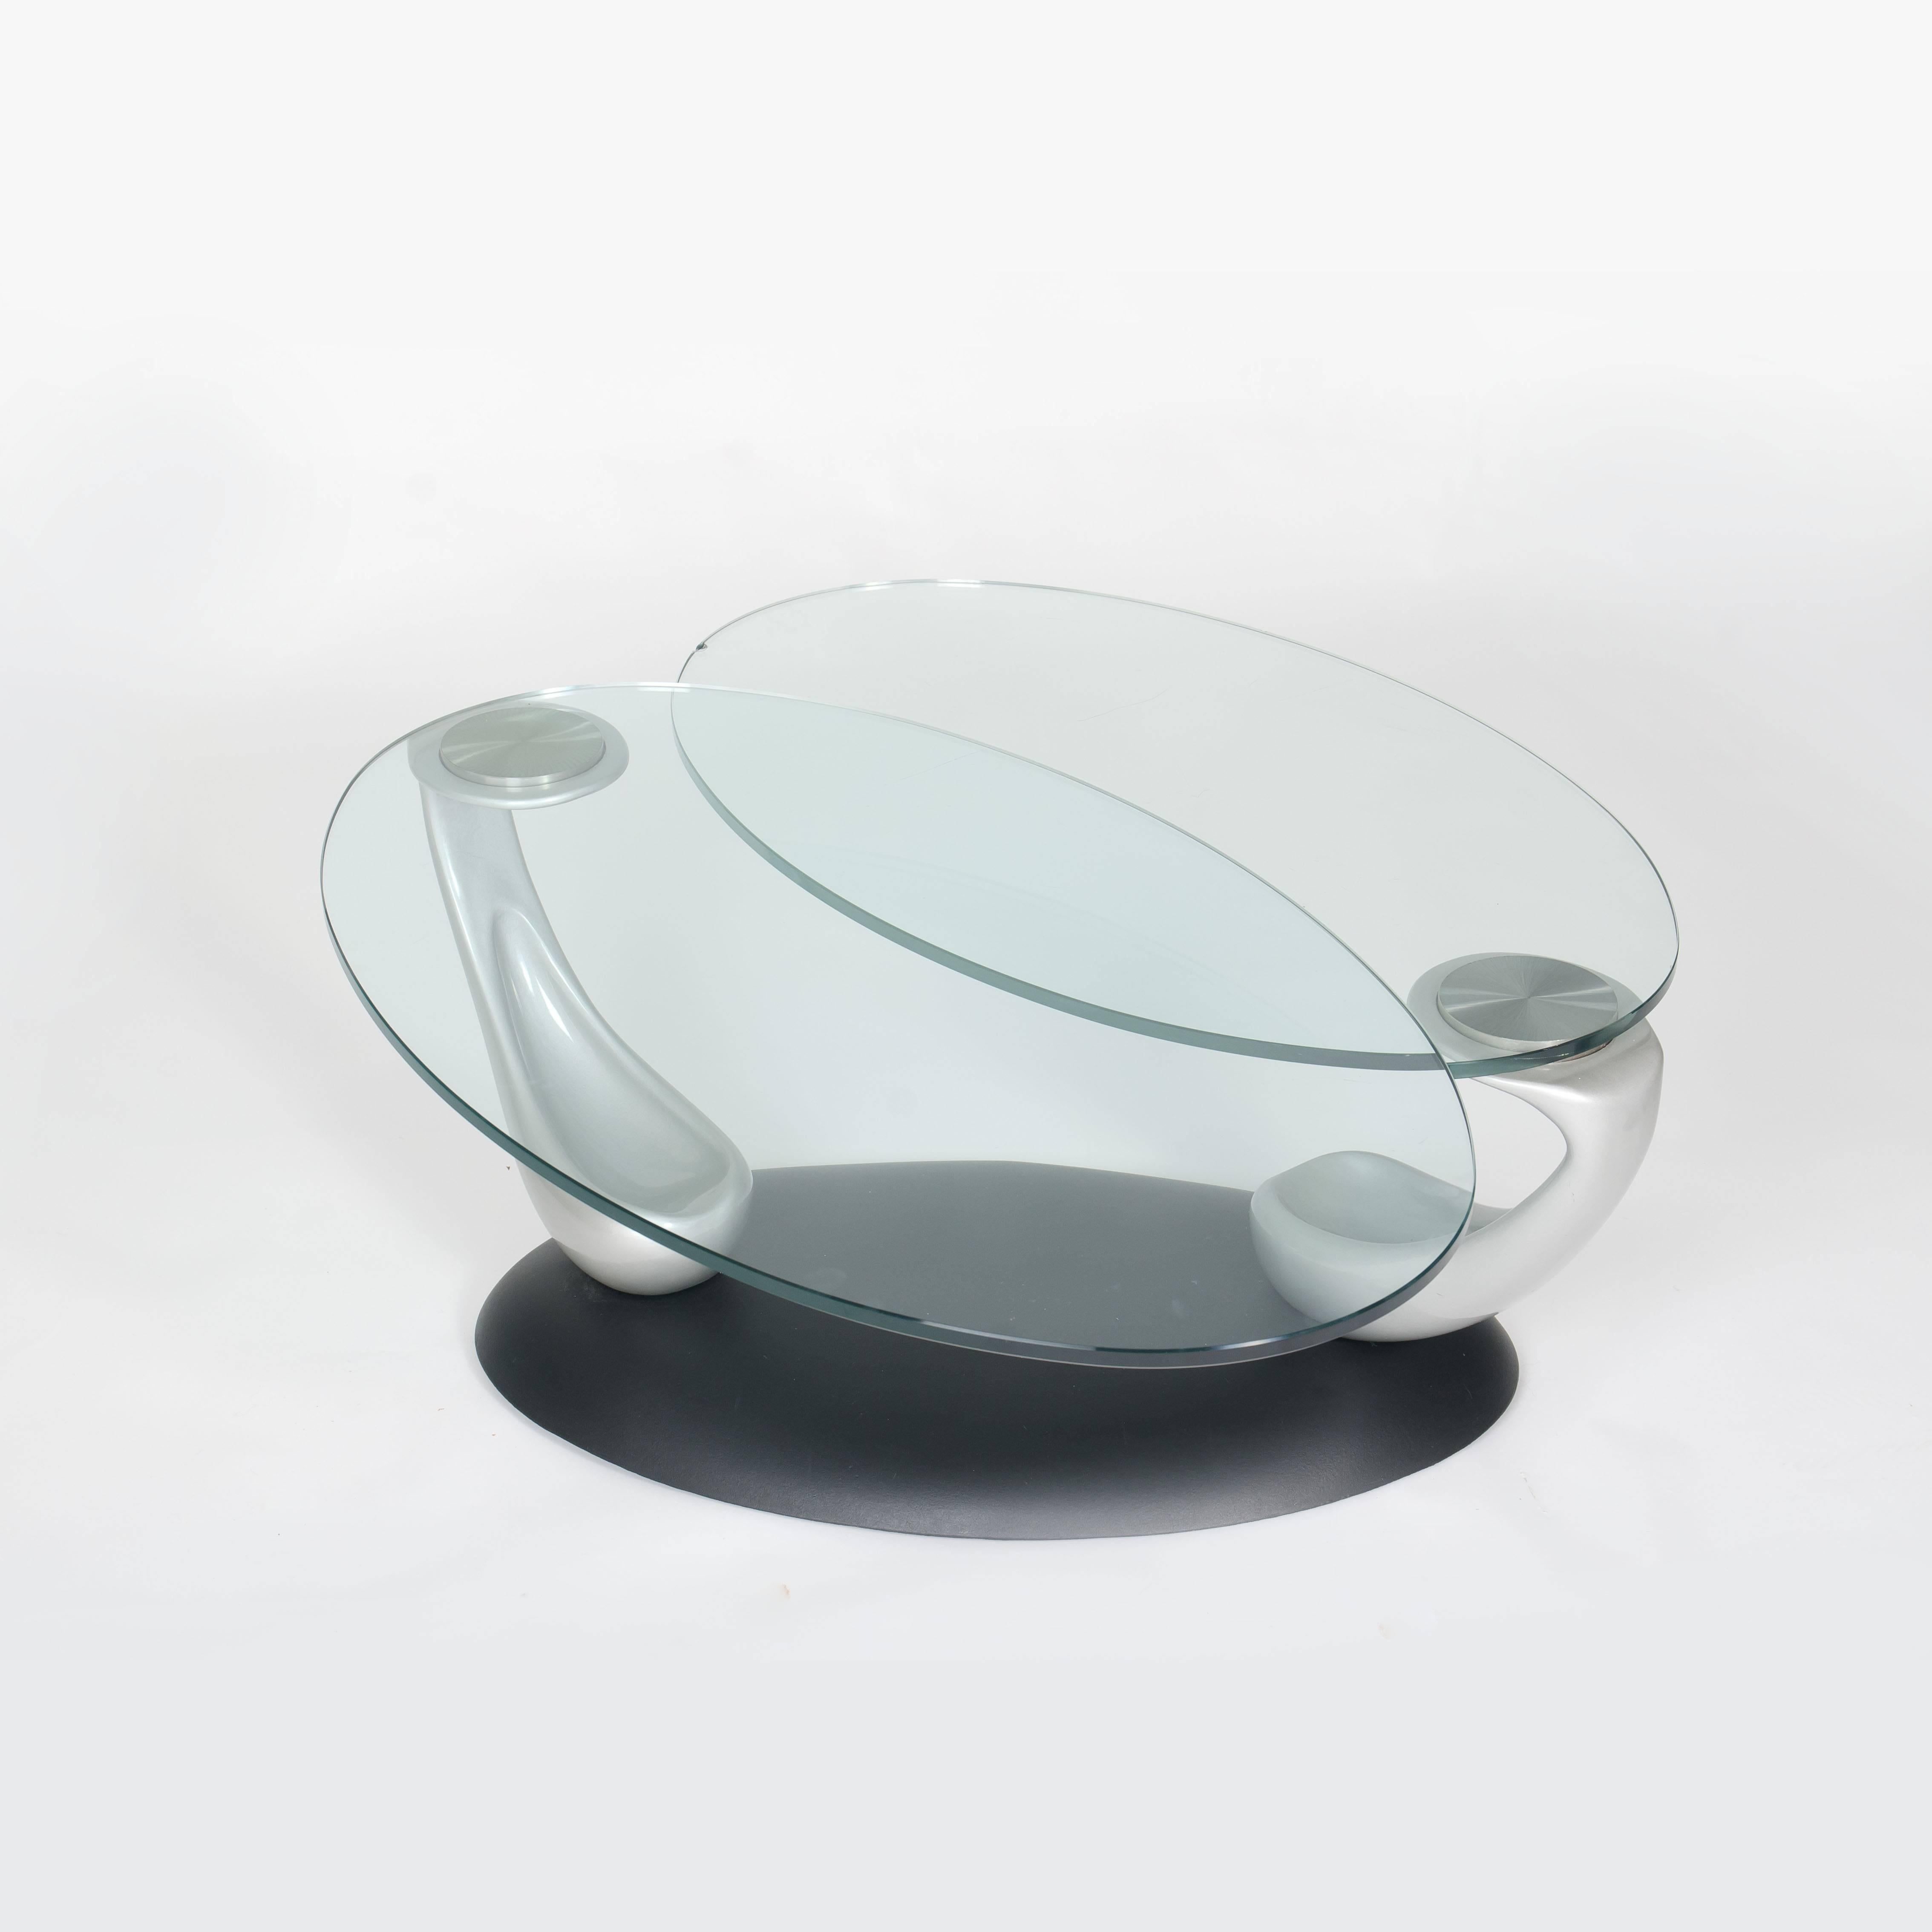 Iconic contemporary NAOS Papillion coffee table by Gamba & Guerra.
Like a beautiful butterfly, this table is designed around an organic structure that exemplifies modern nature.

The sides of the coffee table can be rotated from 360″ closed to 0″